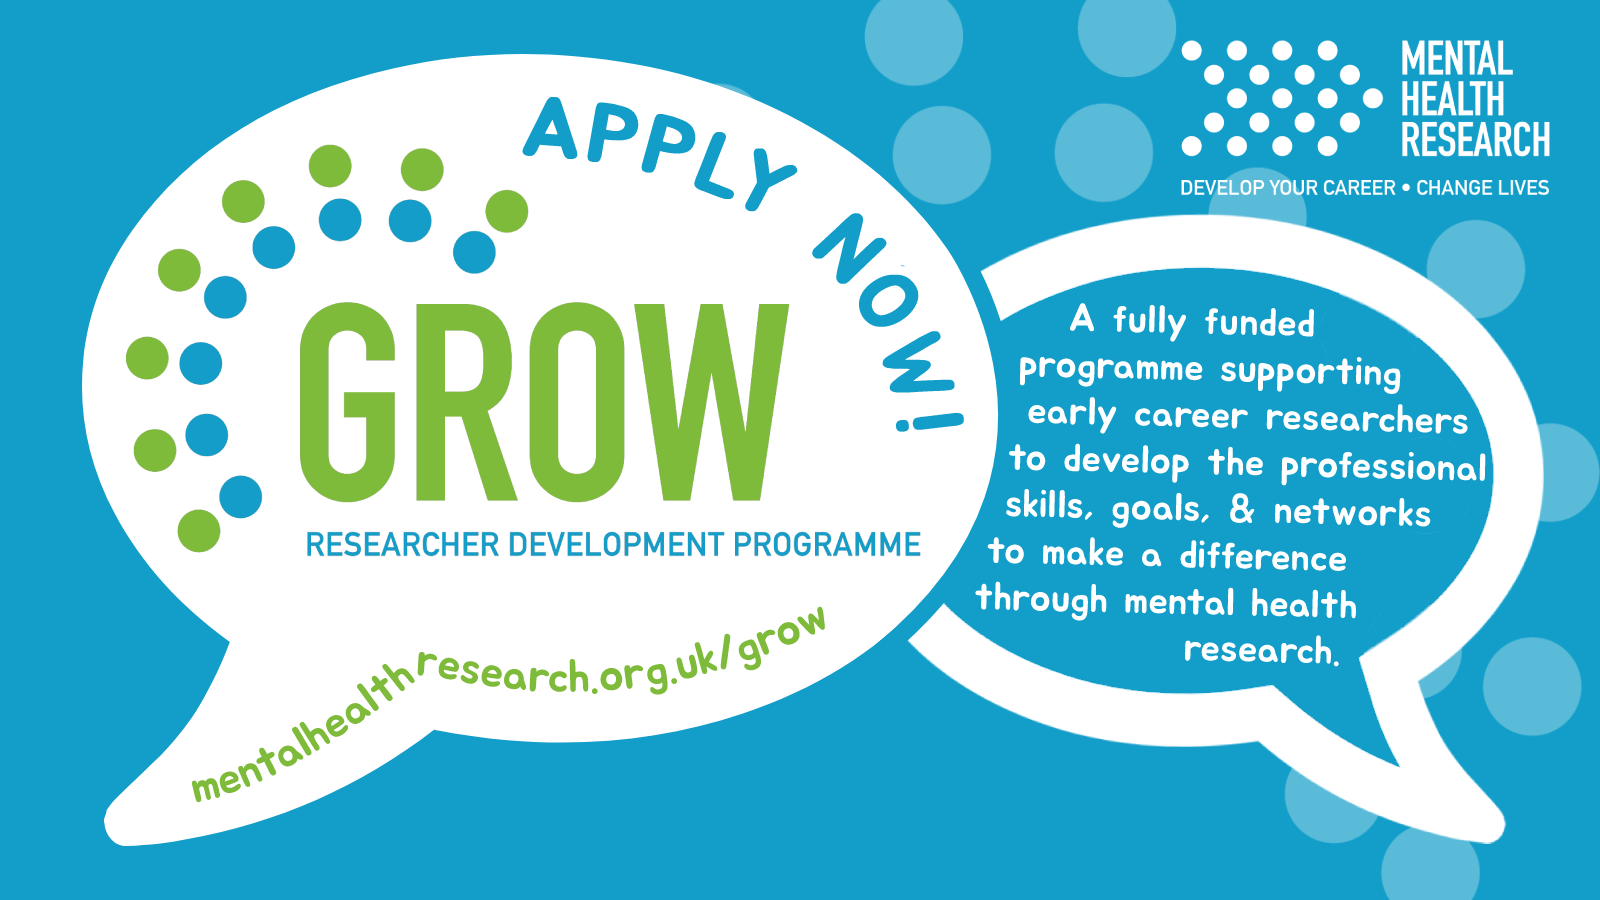 APPLY NOW! GROW researcher development programme. A fully funded programme supporting early career researchers to develop the professional skills, goals & networks to make a difference through mental health research.